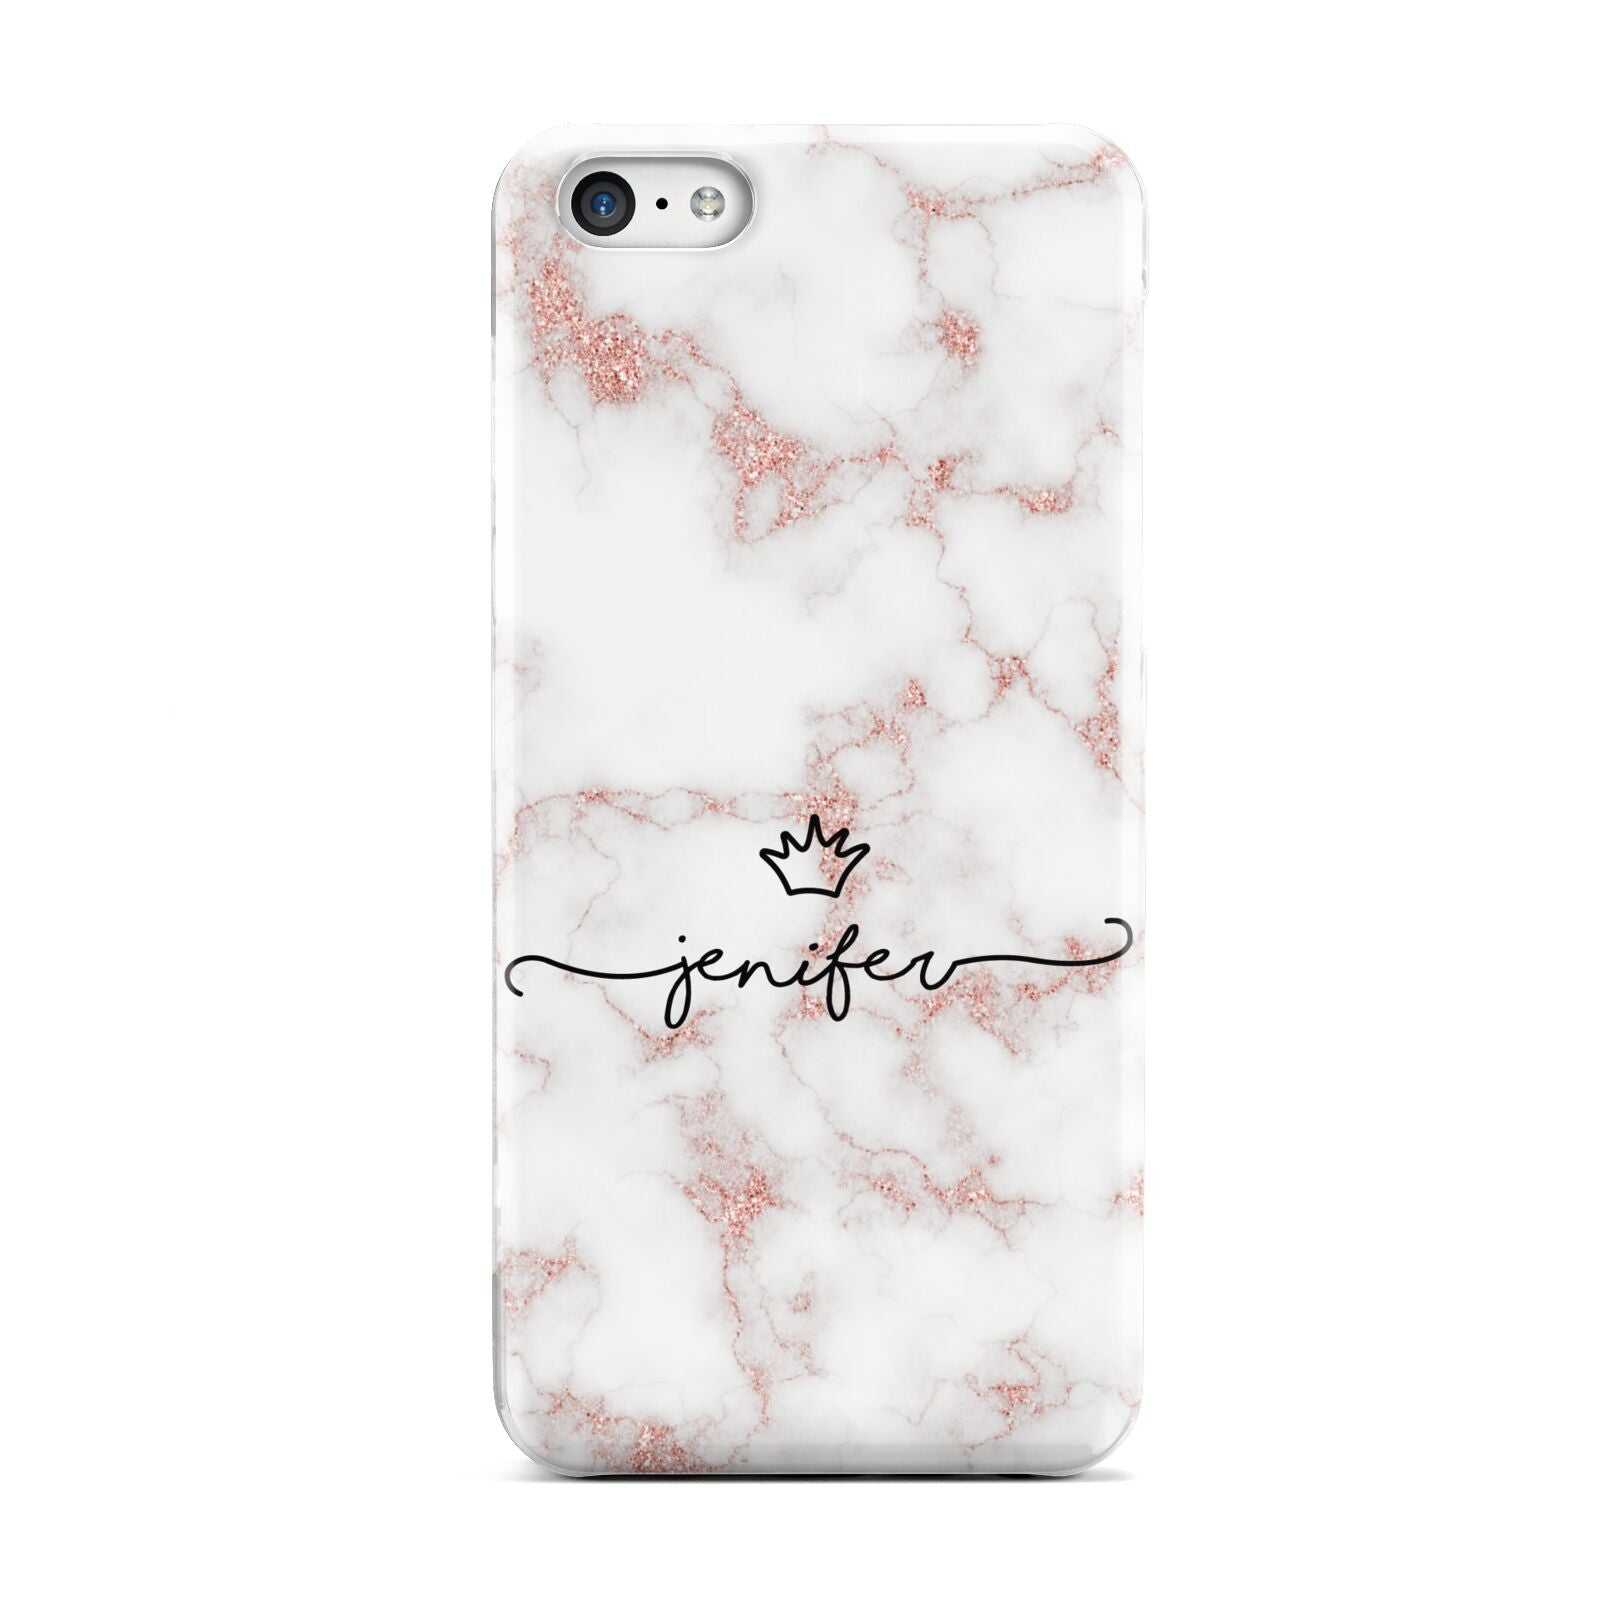 Pink Glitter Marble with Custom Text Apple iPhone 5c Case